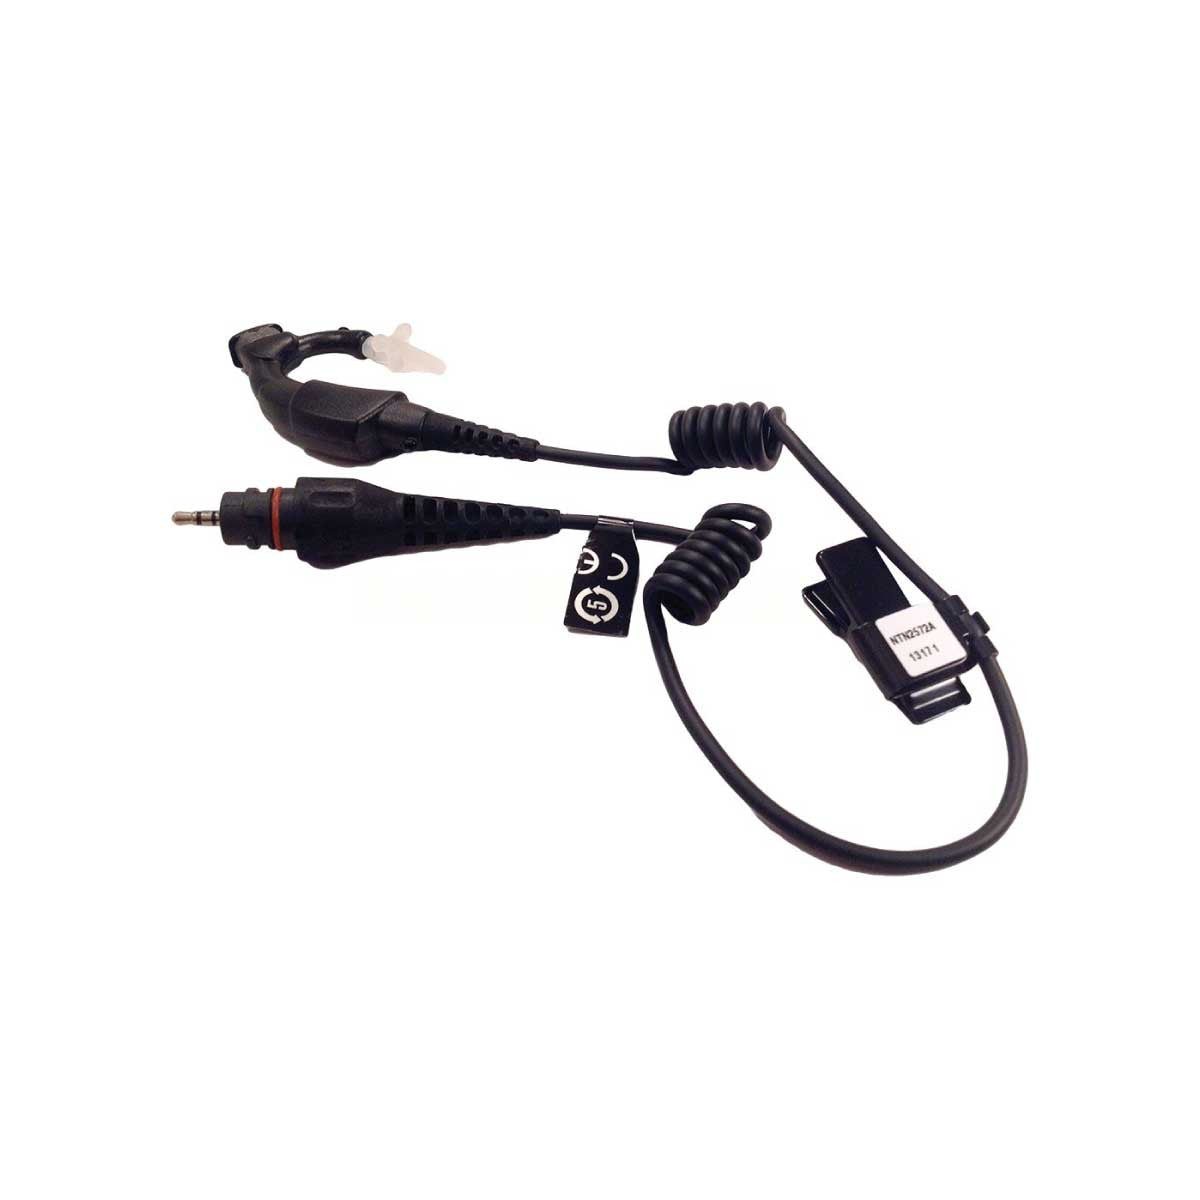 Motorola DP4000 - Earpiece With 12" Cable